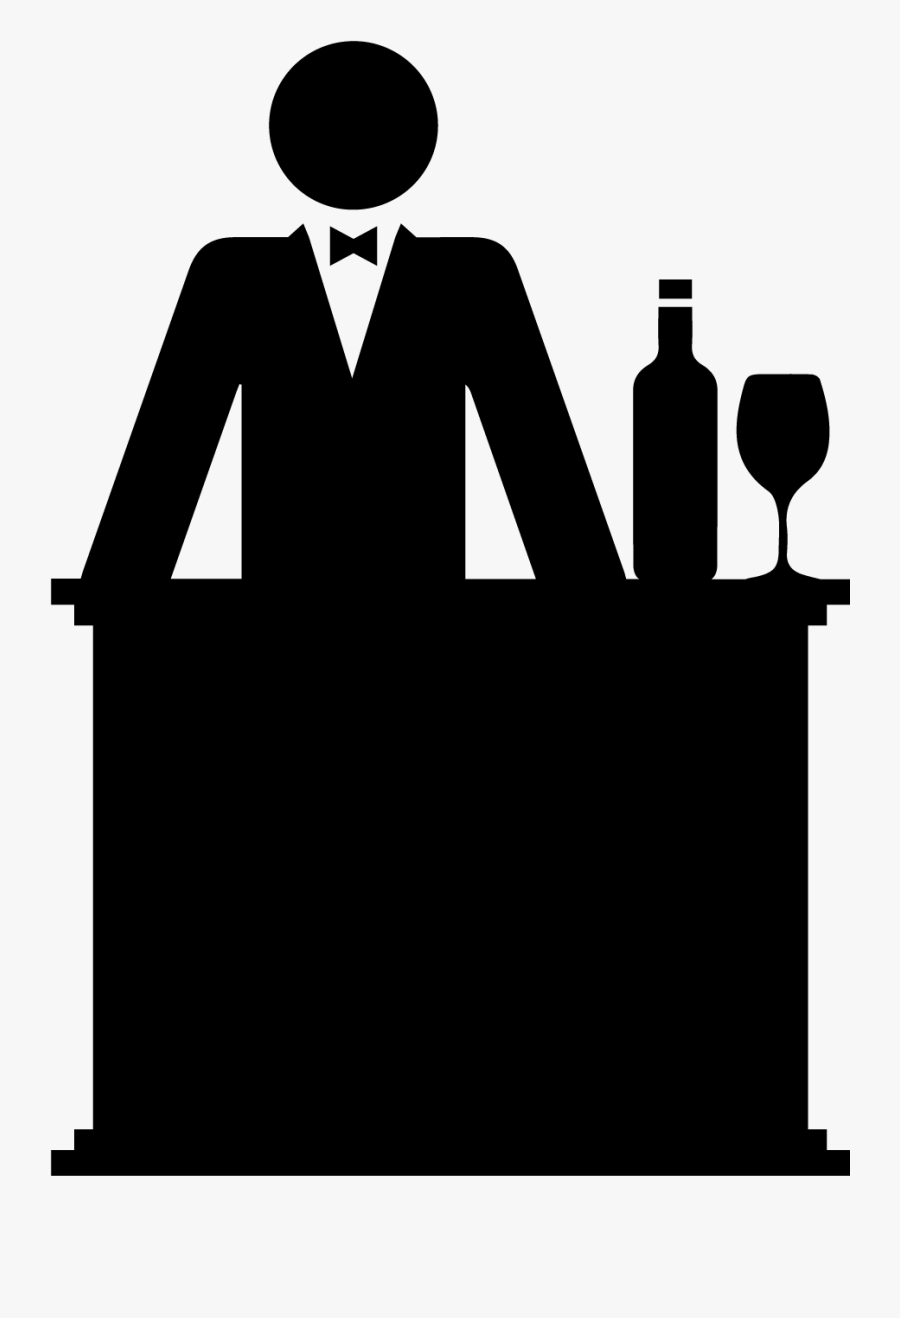 Bar Service Silhouette - Silhouette Bartender Png, Transparent Clipart